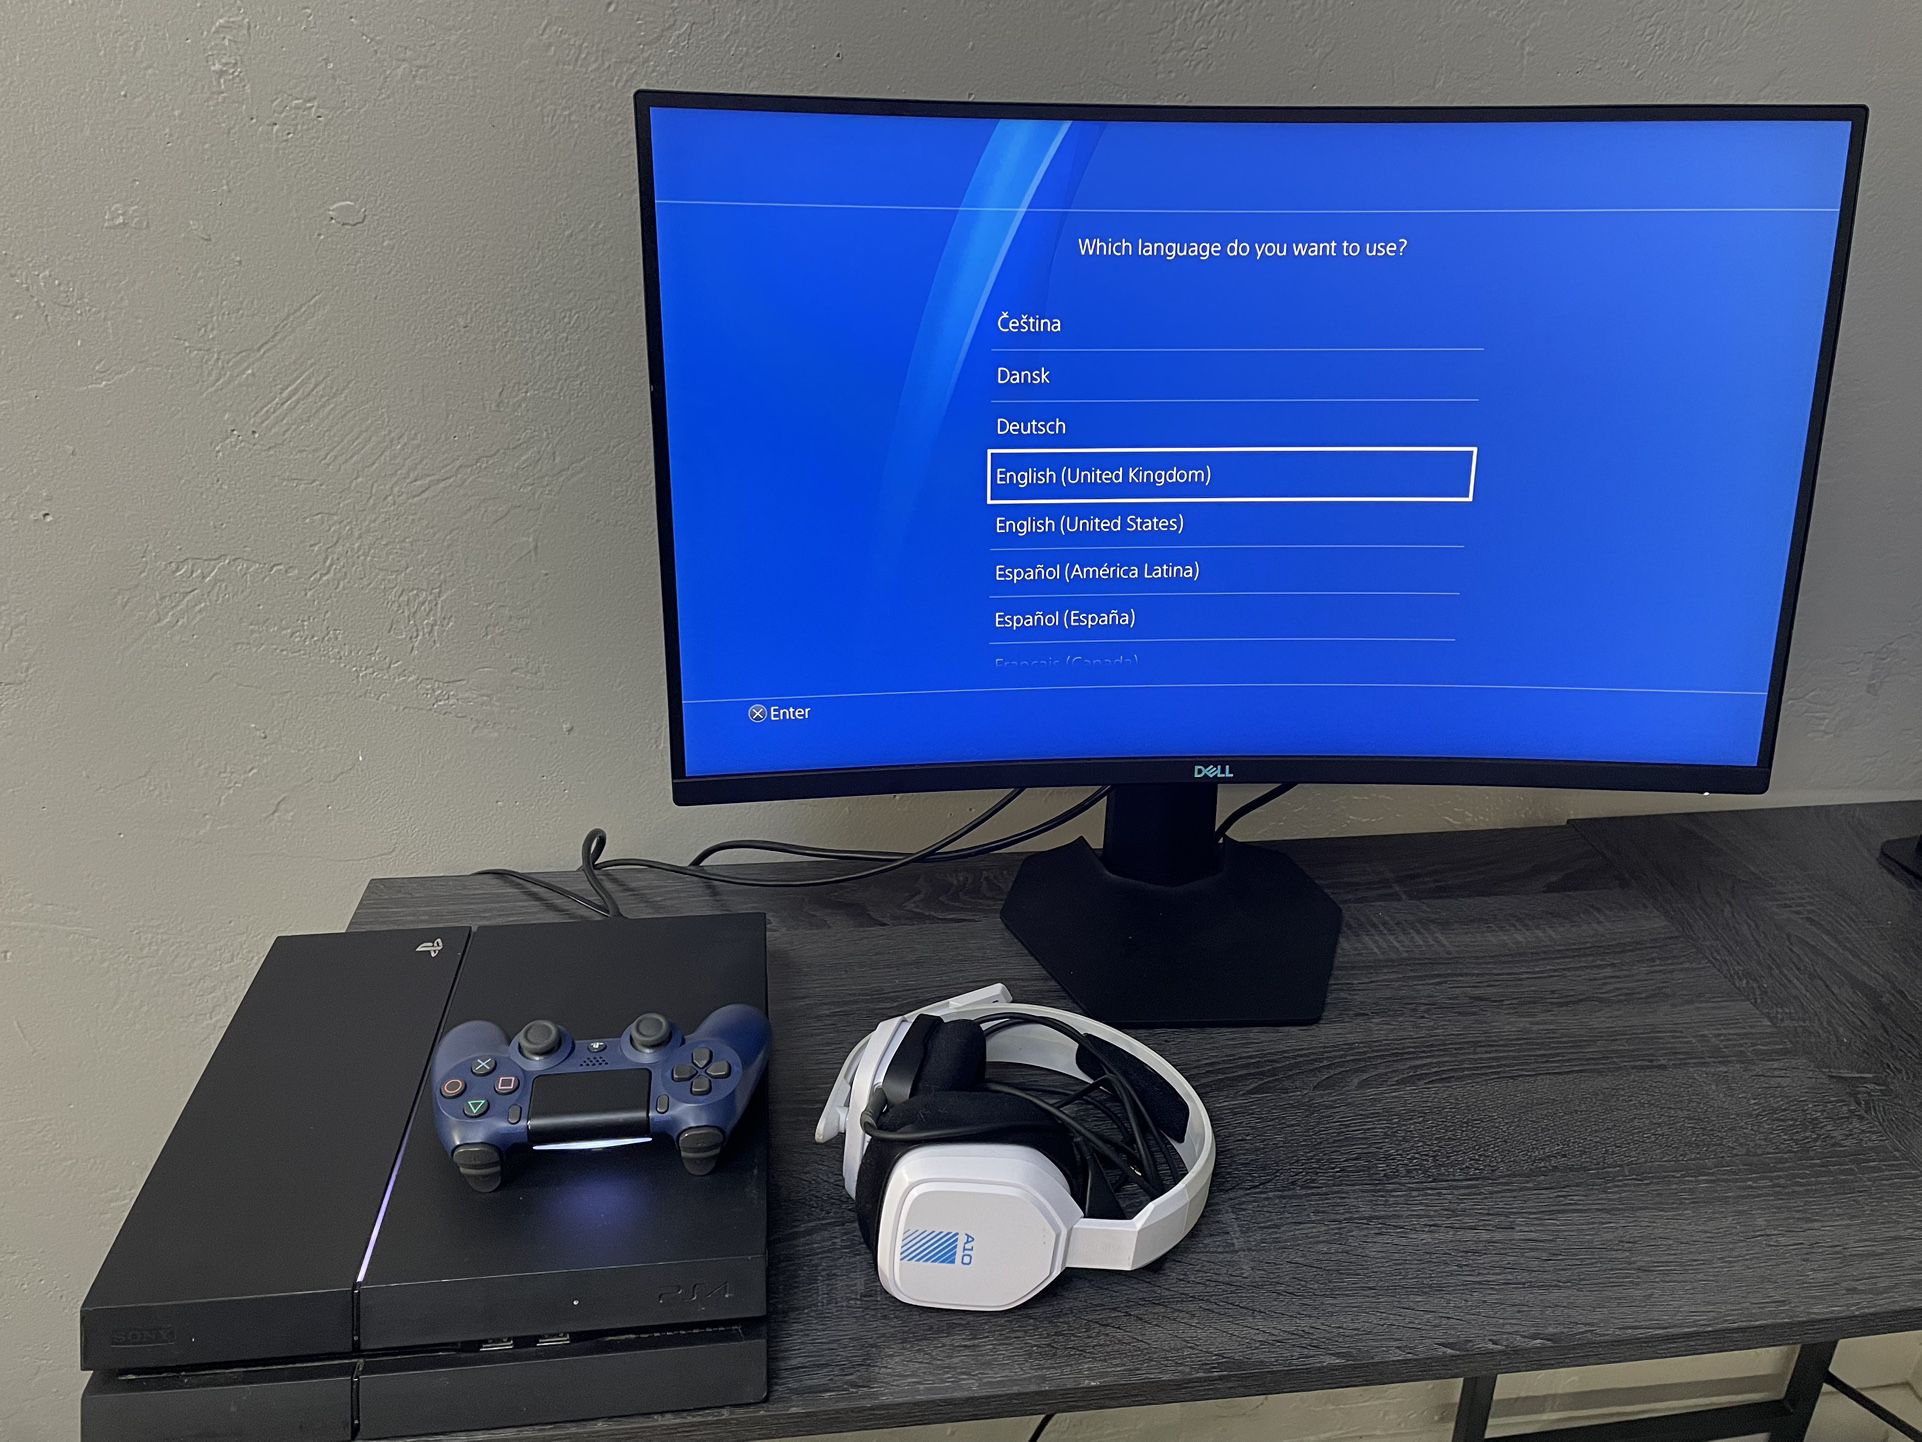 Ps4 And A10 Headset